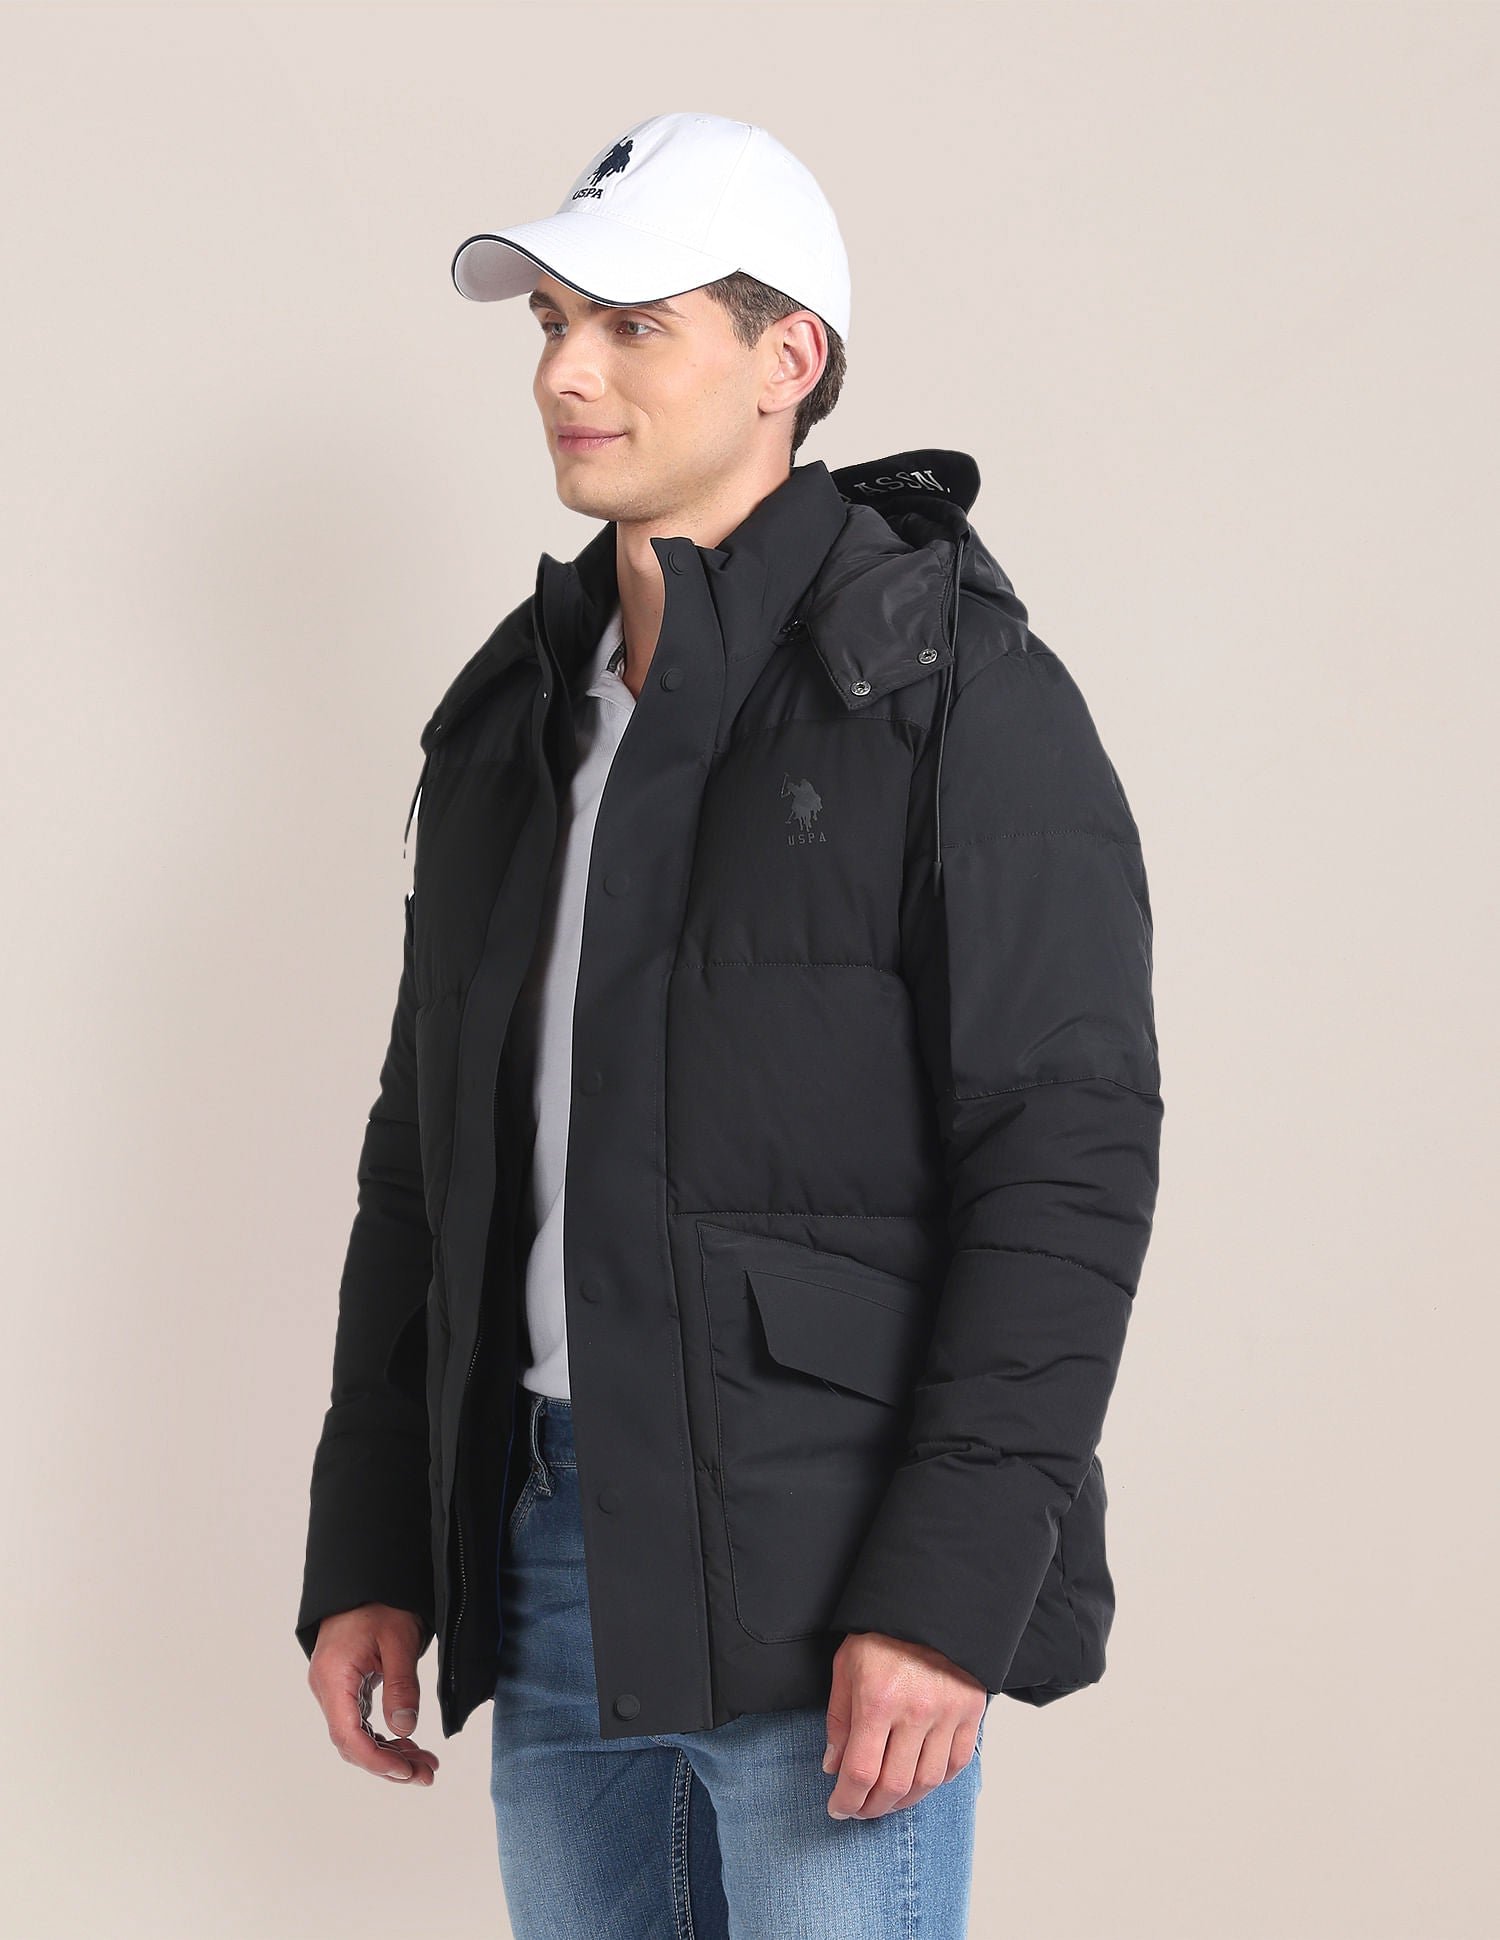 U.S. POLO ASSN. Solid Puffer Jacket Olive, 3XL in Hyderabad at best price  by U S Polo Assn (Next Galleria Mall) - Justdial